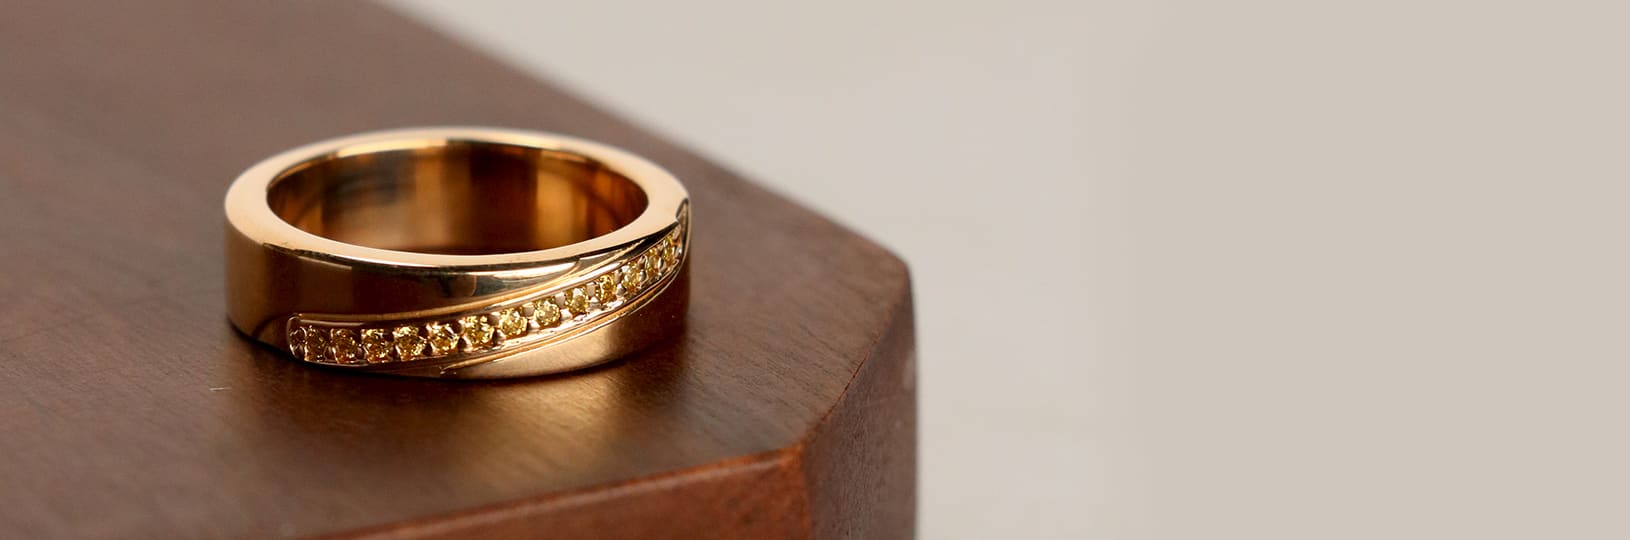 A wedding band with colorful gemstones